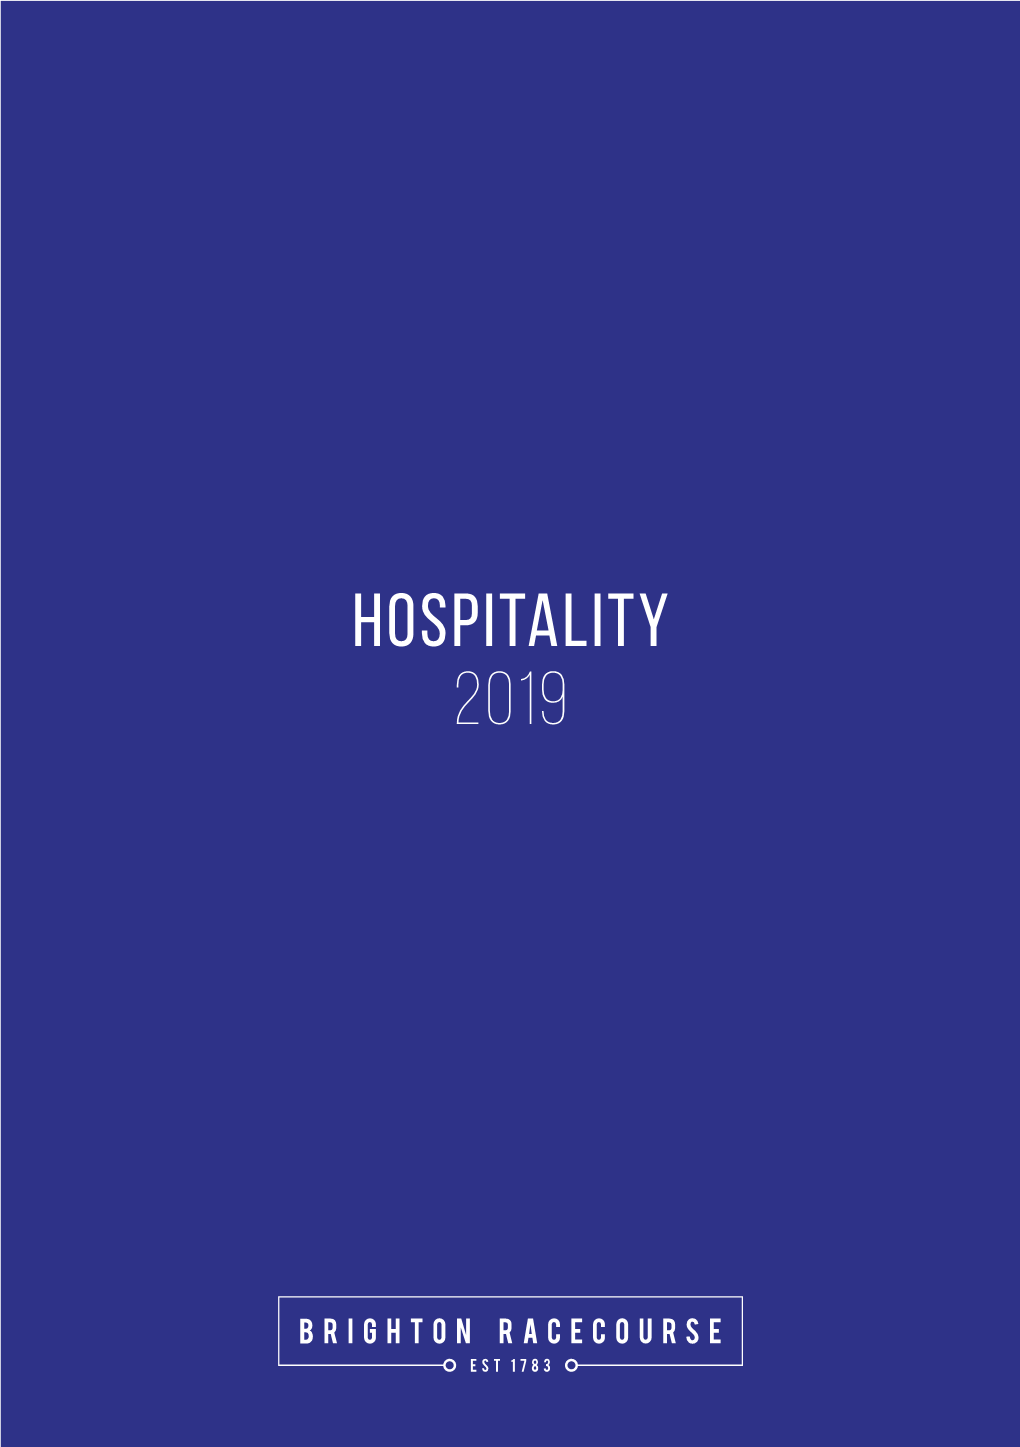 HOSPITALITY 2019 Take in Some of the Best Views in Brighton and Enjoy the Racing Action from Our Stunning Hospitality Suites and Restaurants